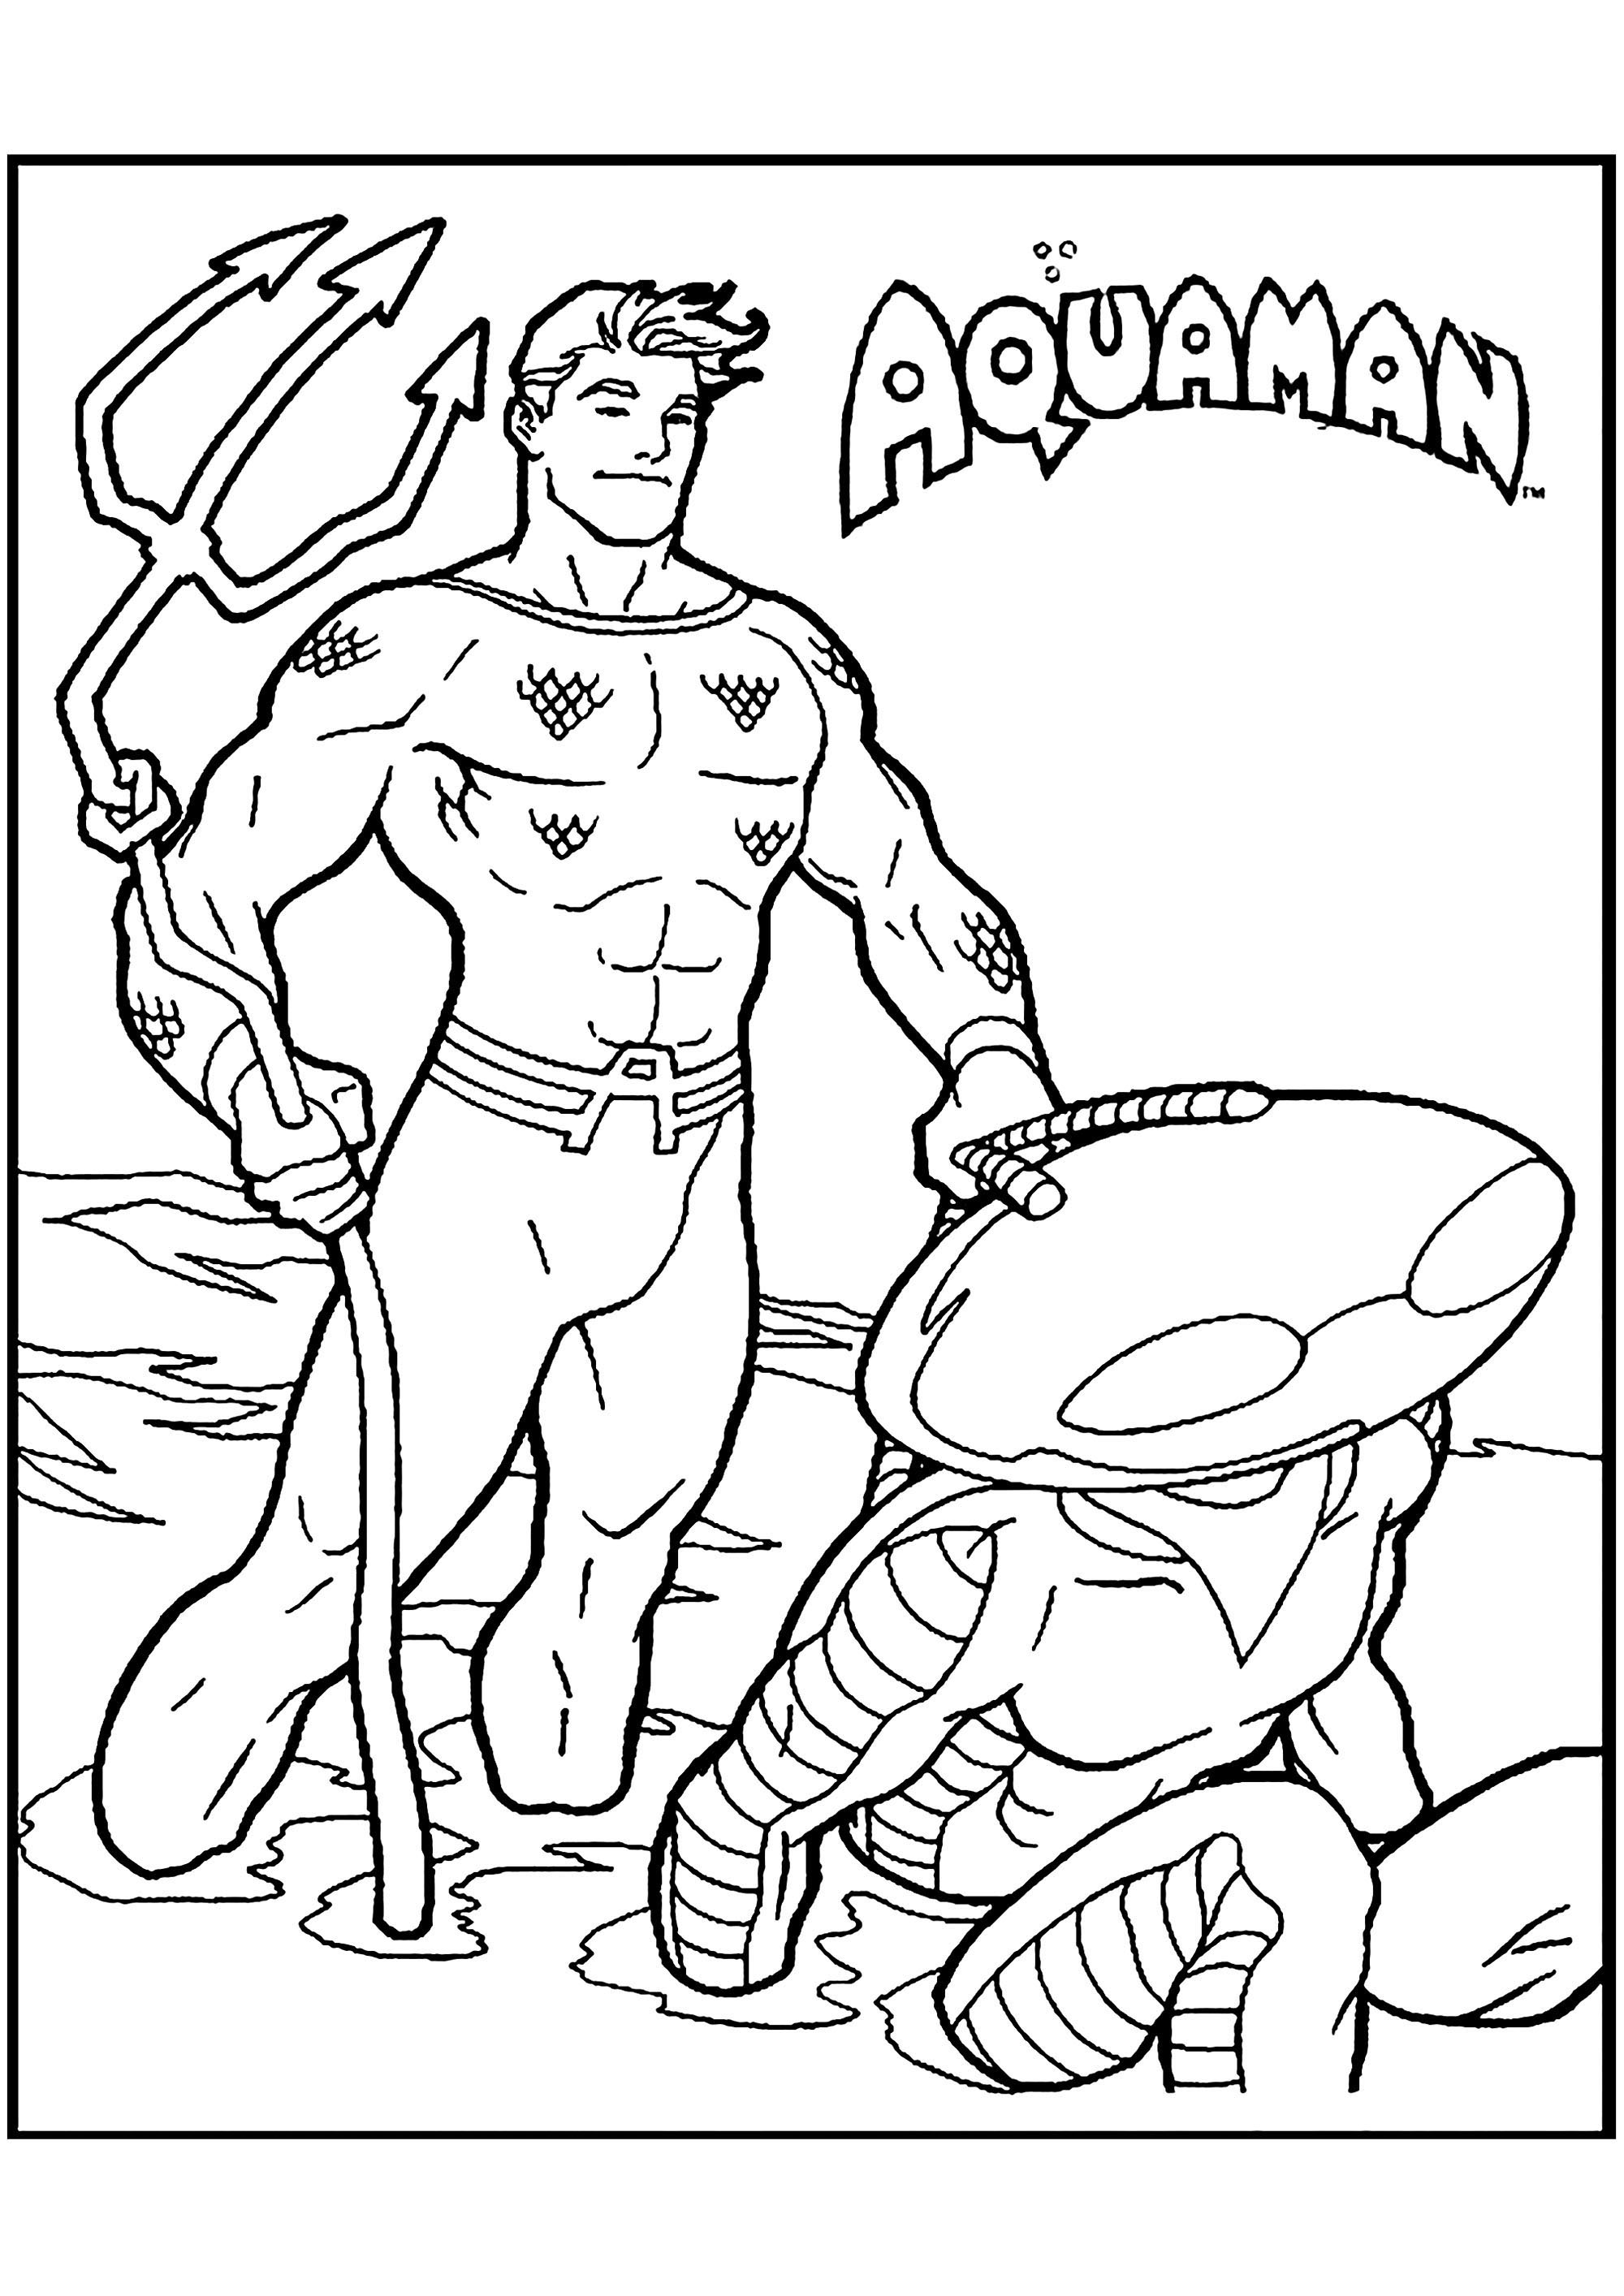 Lego Aquaman Coloring Pages : Maybe you would like to learn more about